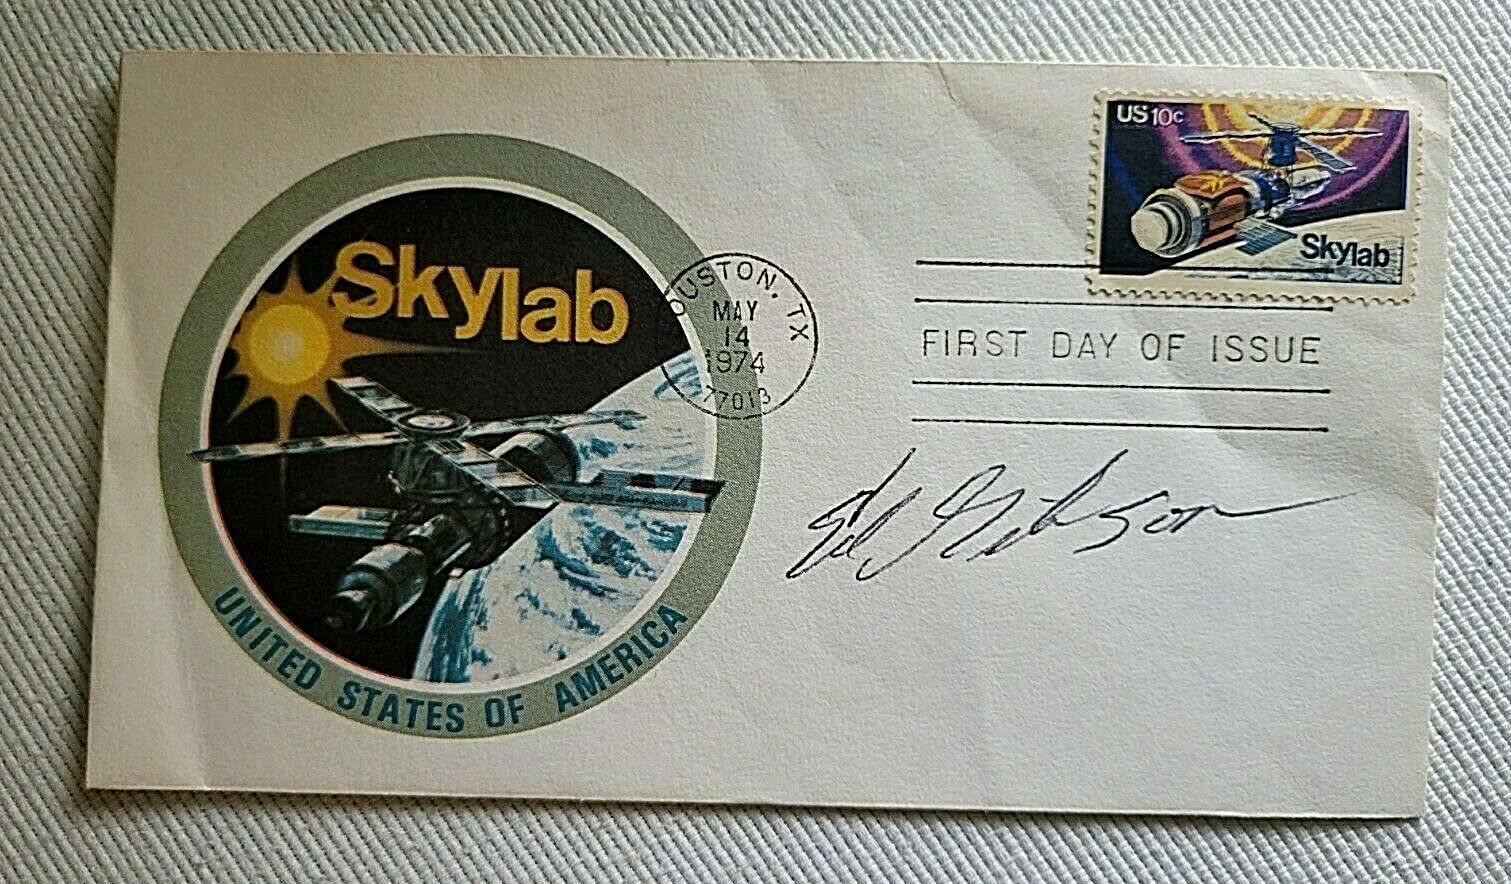 ED GIBSON SkyLab ASTRONAUT Signed NASA FDC Autographed with Patch BECKETT T42548 Без бренда - фотография #2